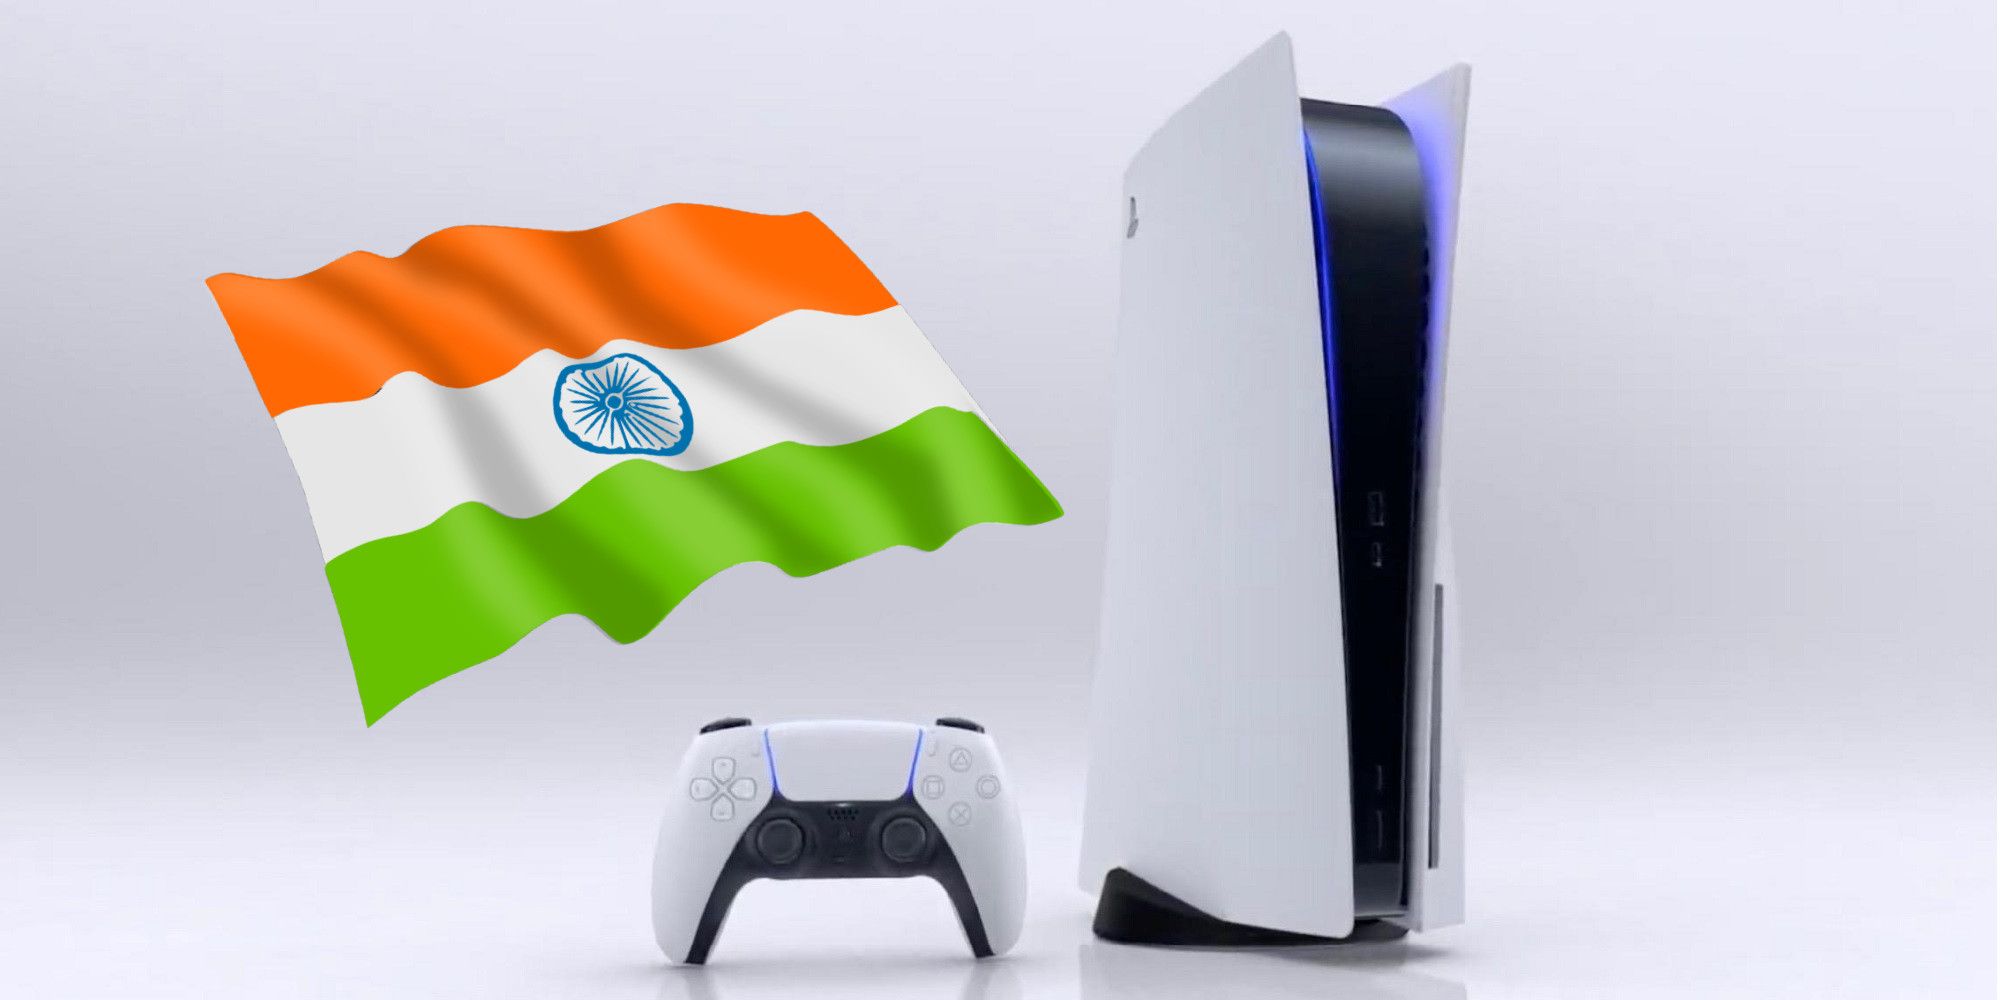 Sony's PlayStation 5 console wth the Indian flag.